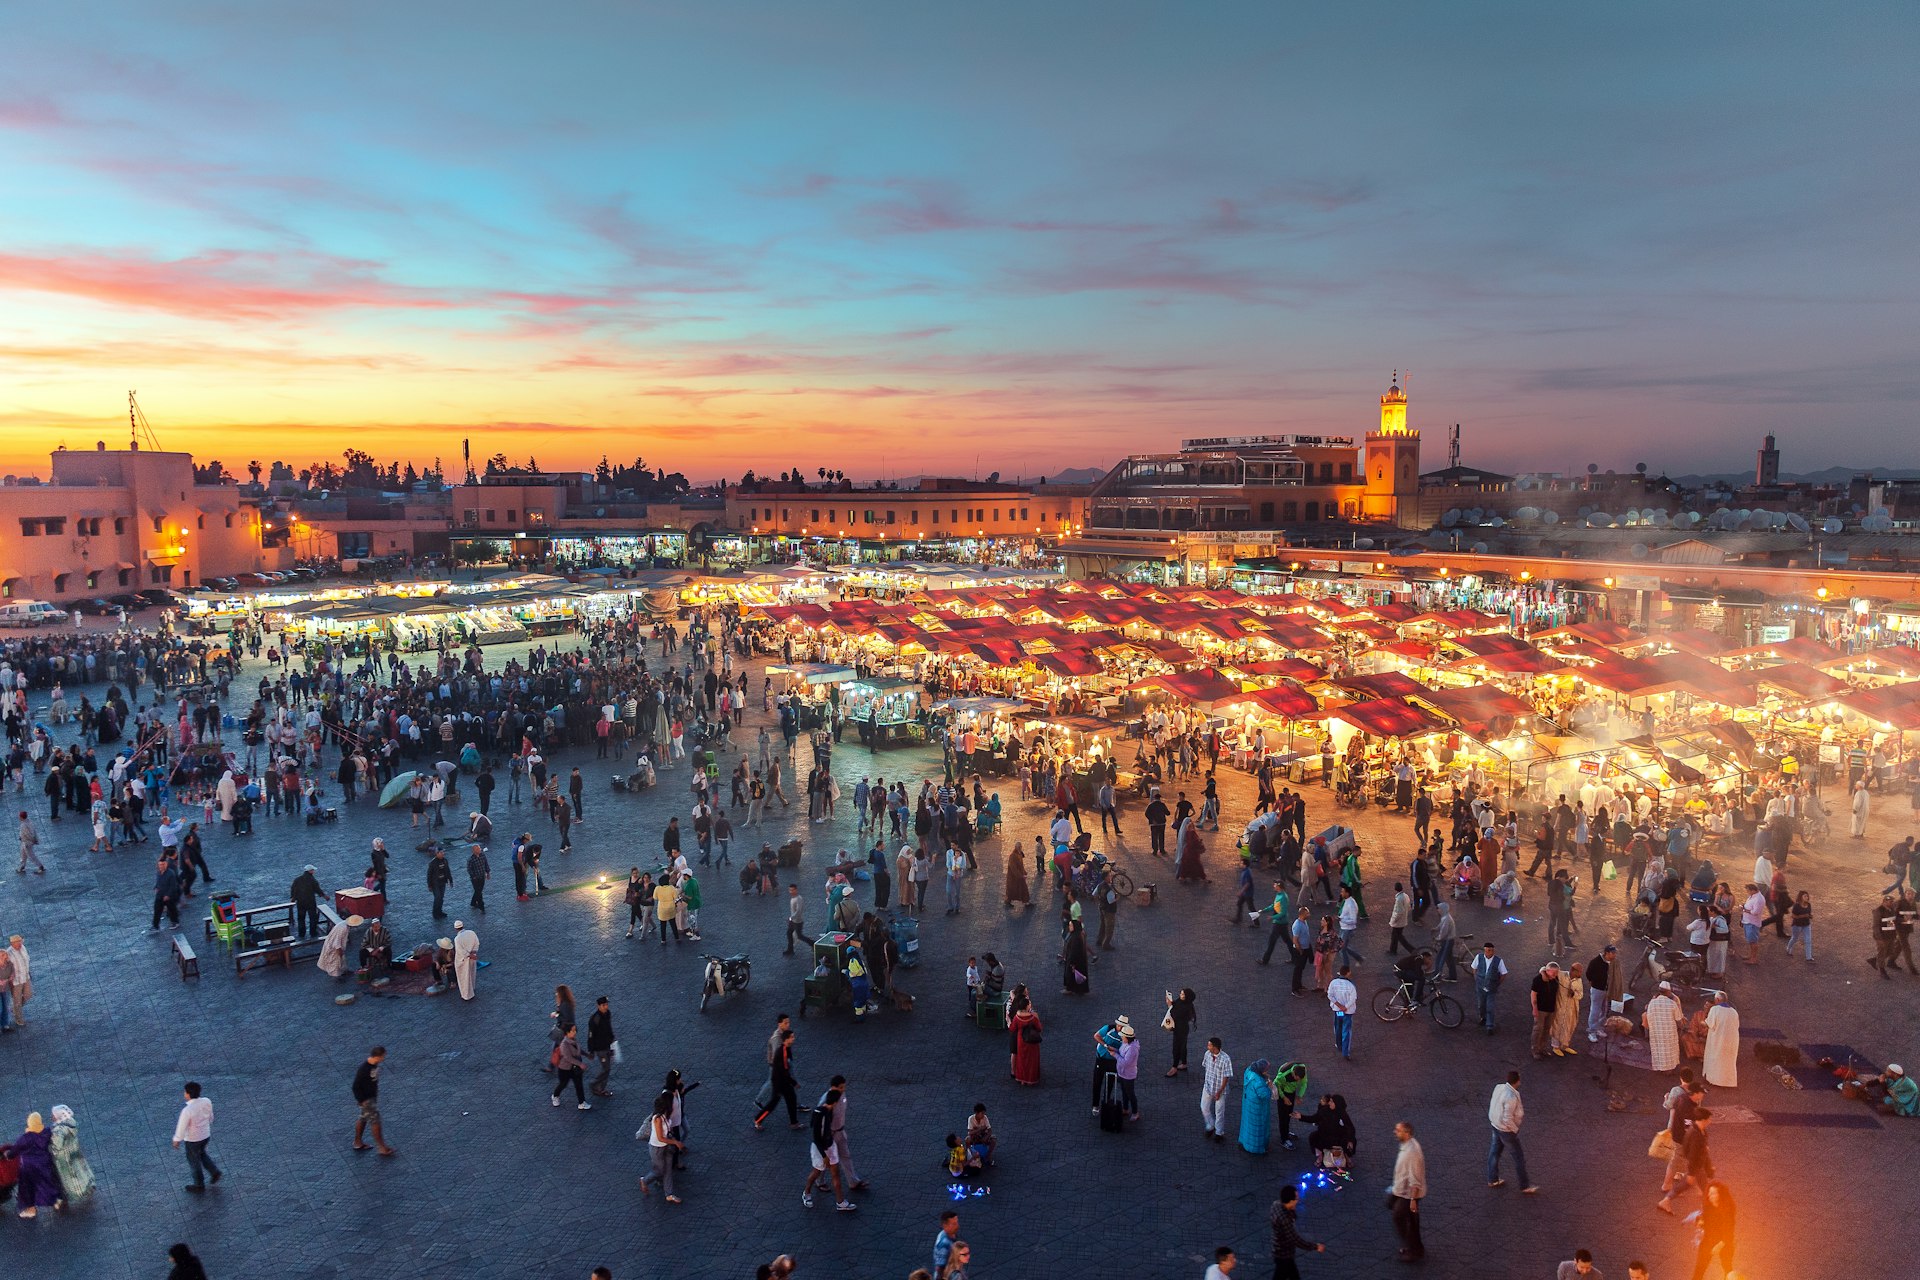 Evening at Djemaa El Fna Square in Marrakesh, Morocco